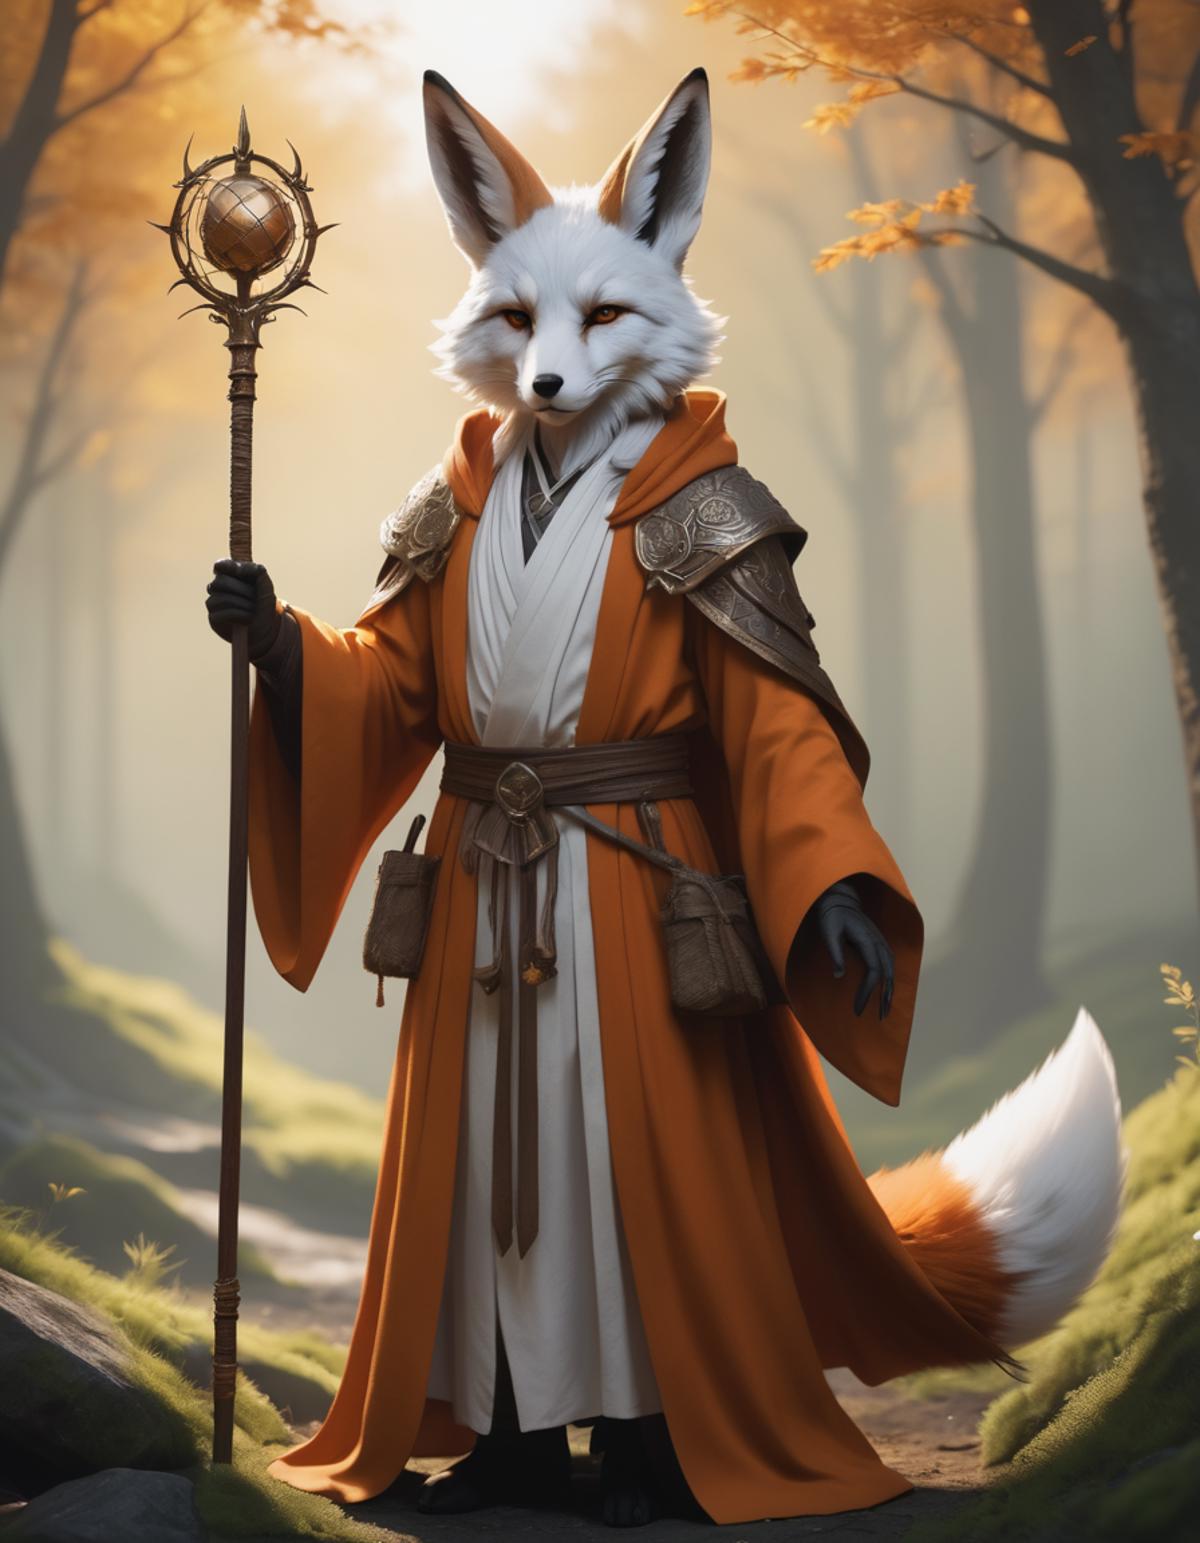 A fox with a staff and a robe.